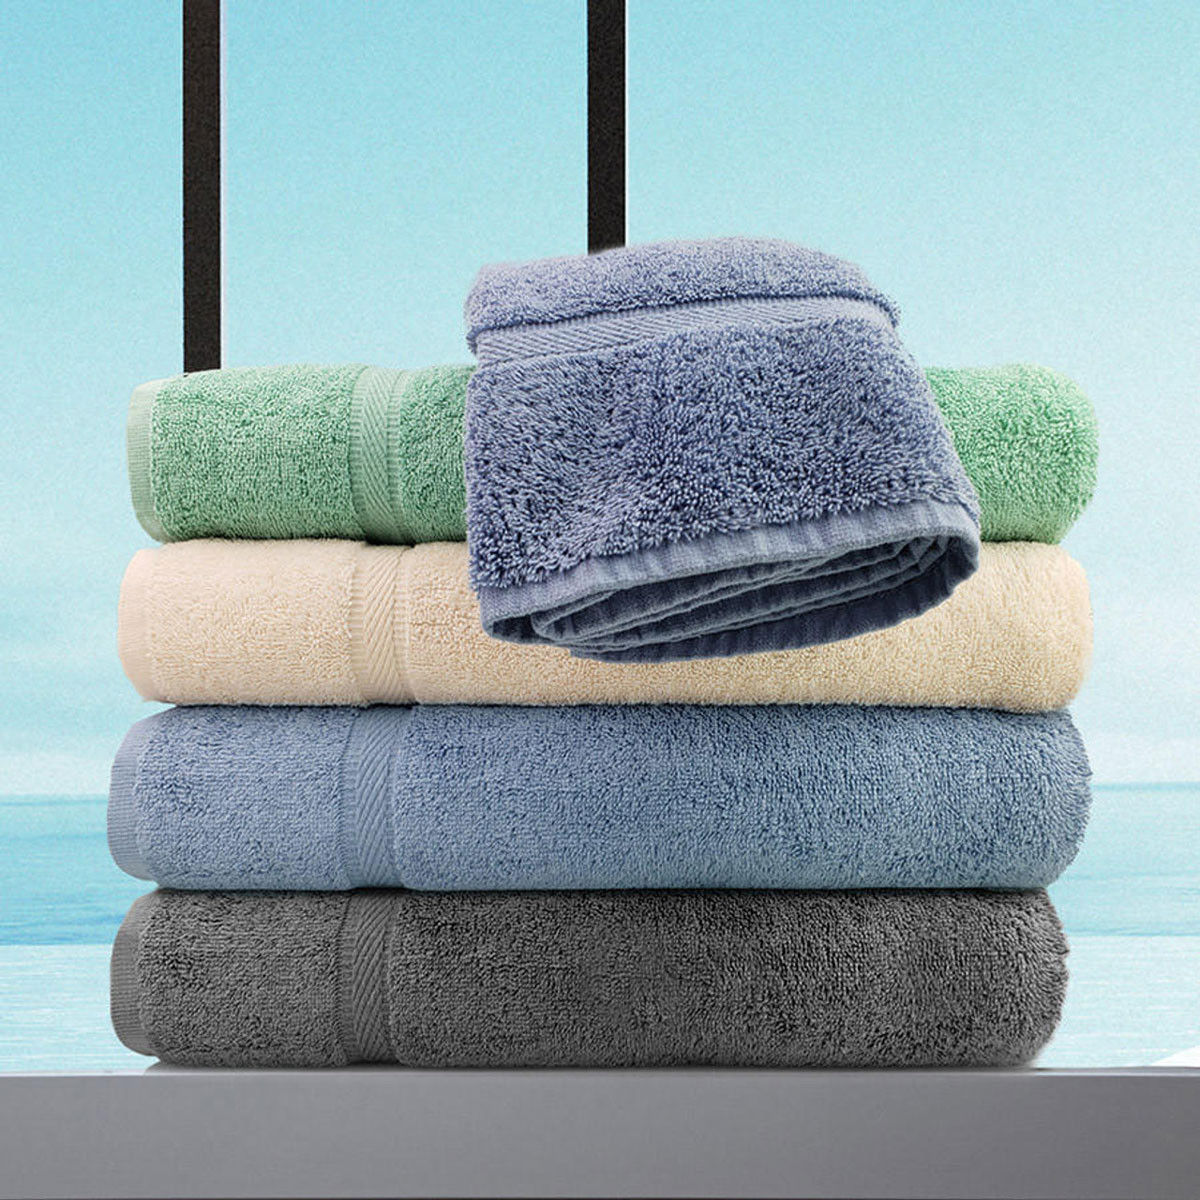 Can you tell me what material the Charcoal Grey Oxford Imperiale Towels are made of?